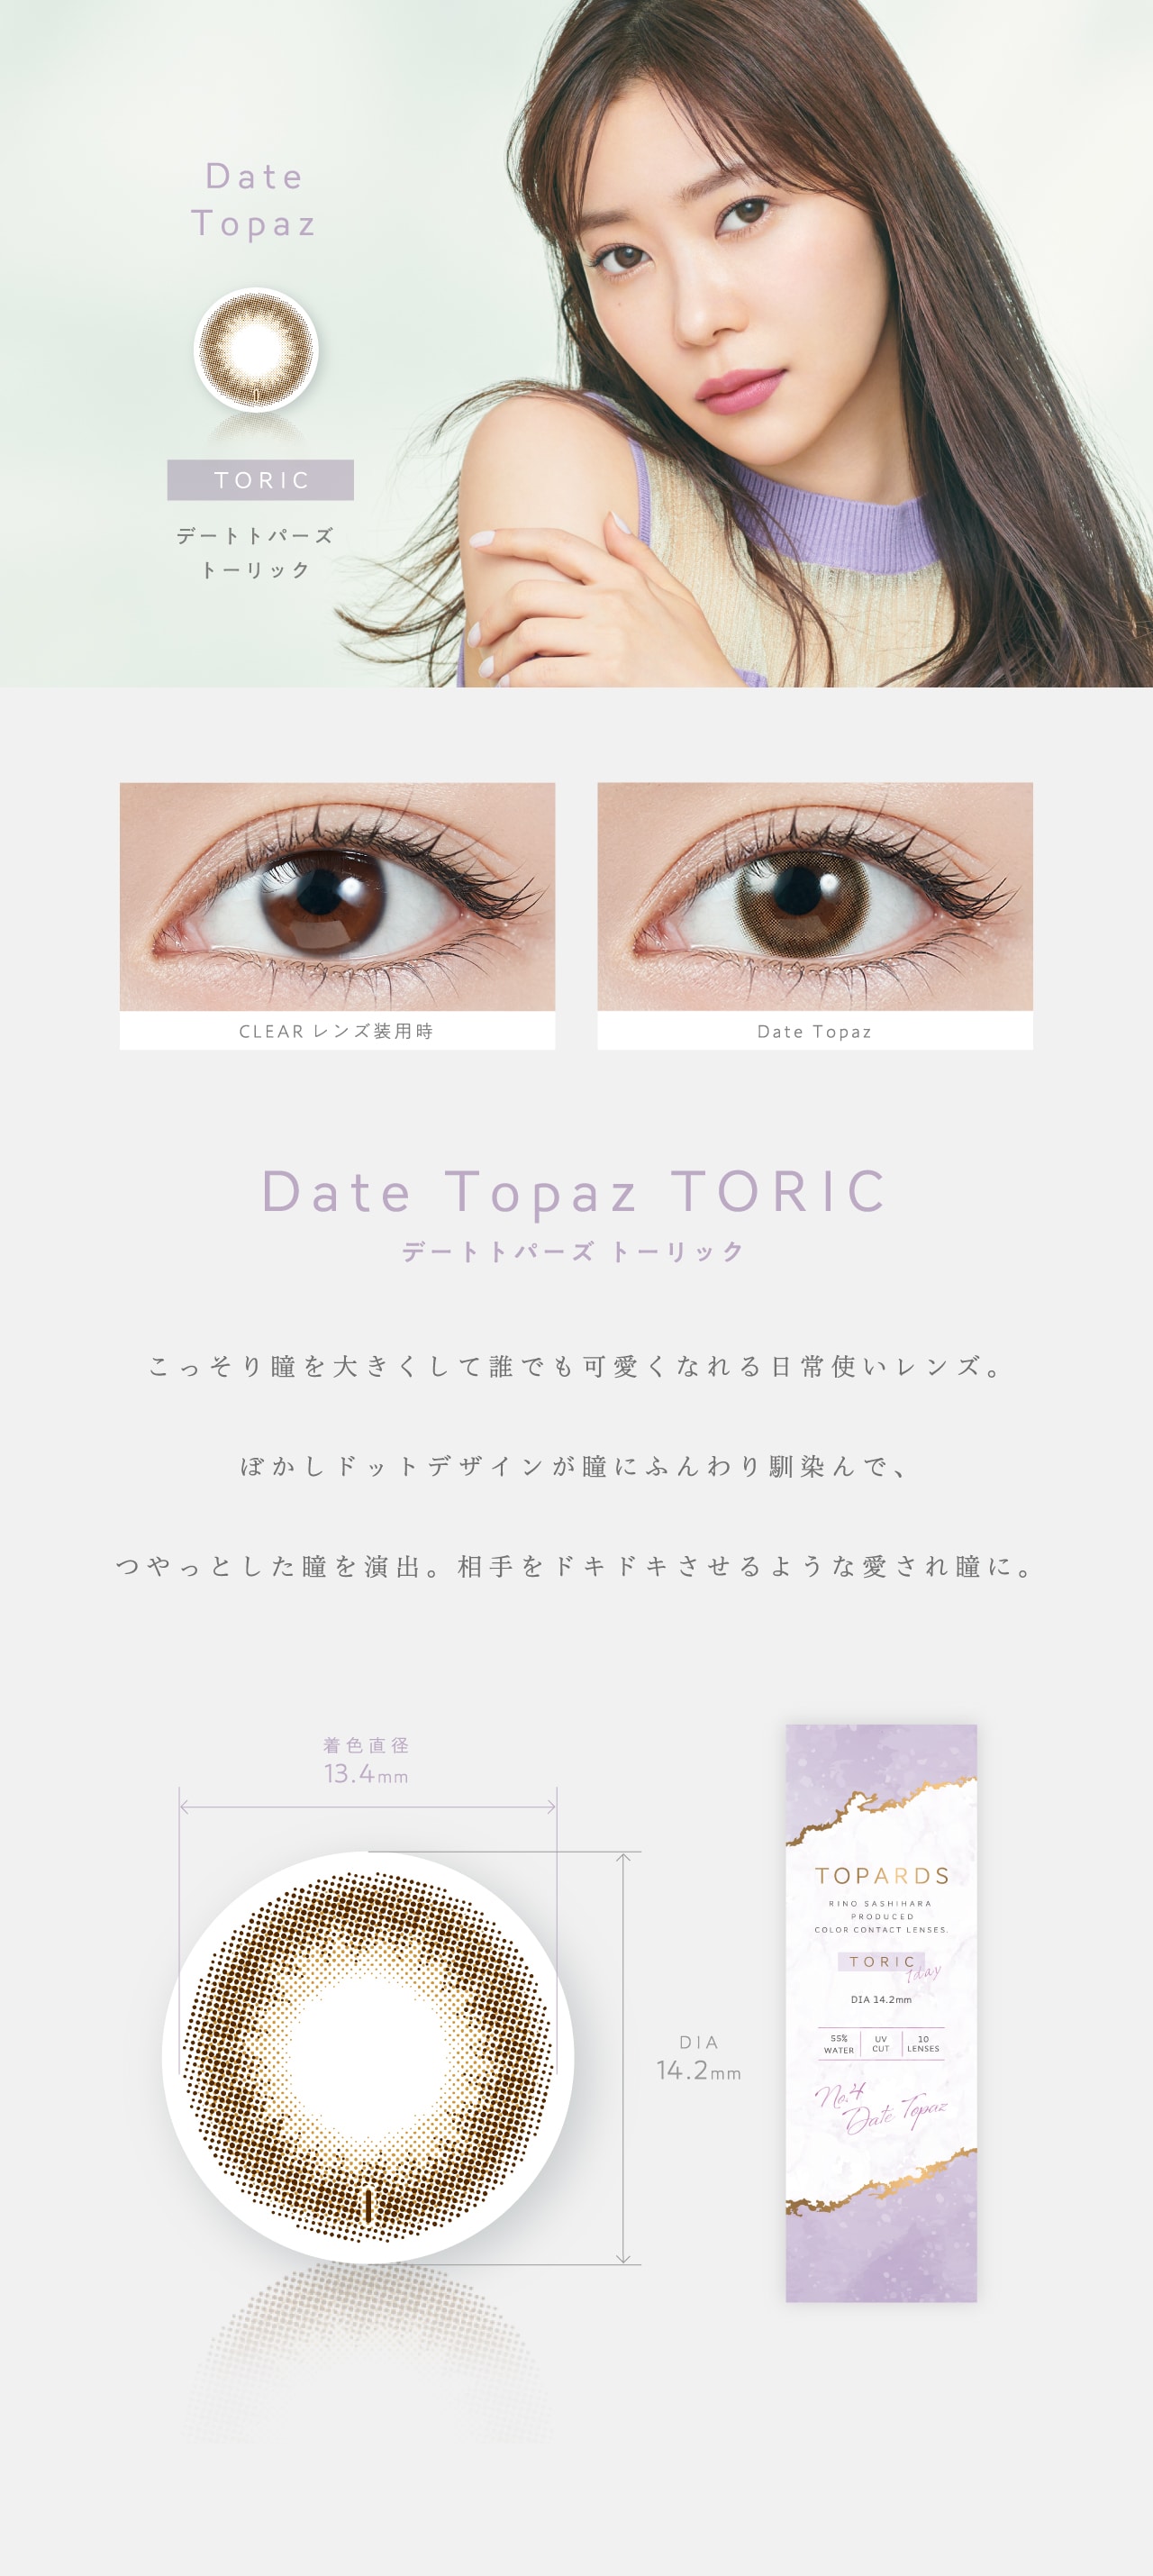 TOPARDS TORIC 1day トパーズ トーリック ワンデー【Date Topaz TORIC デートトパーズトーリック】